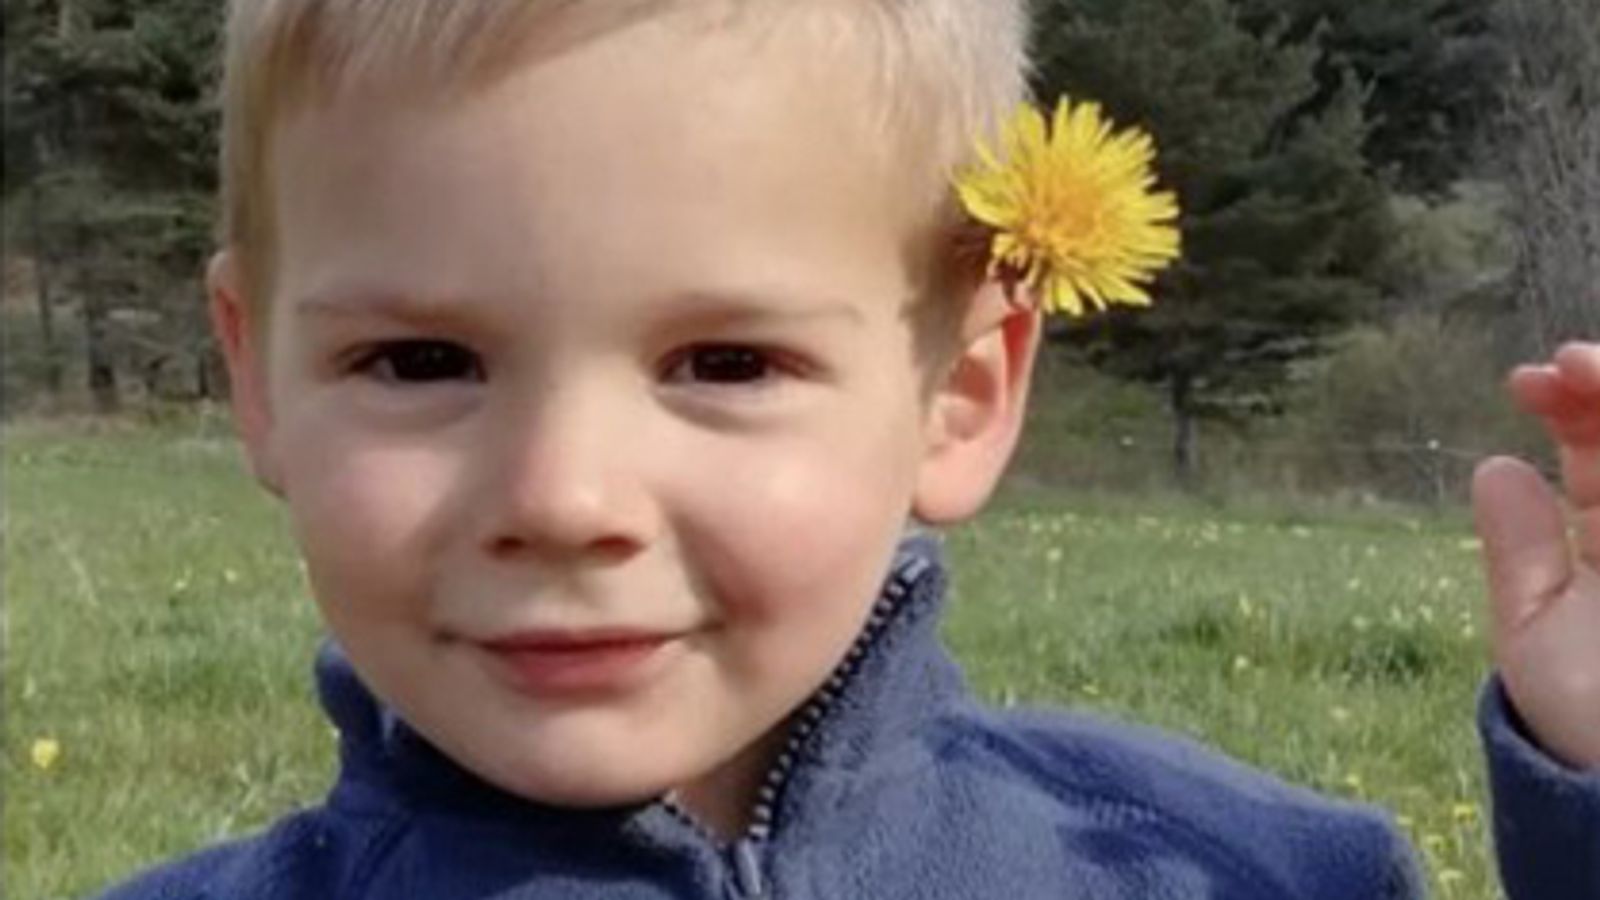 Remains found of two-year-old boy Emile who has been missing in France since July